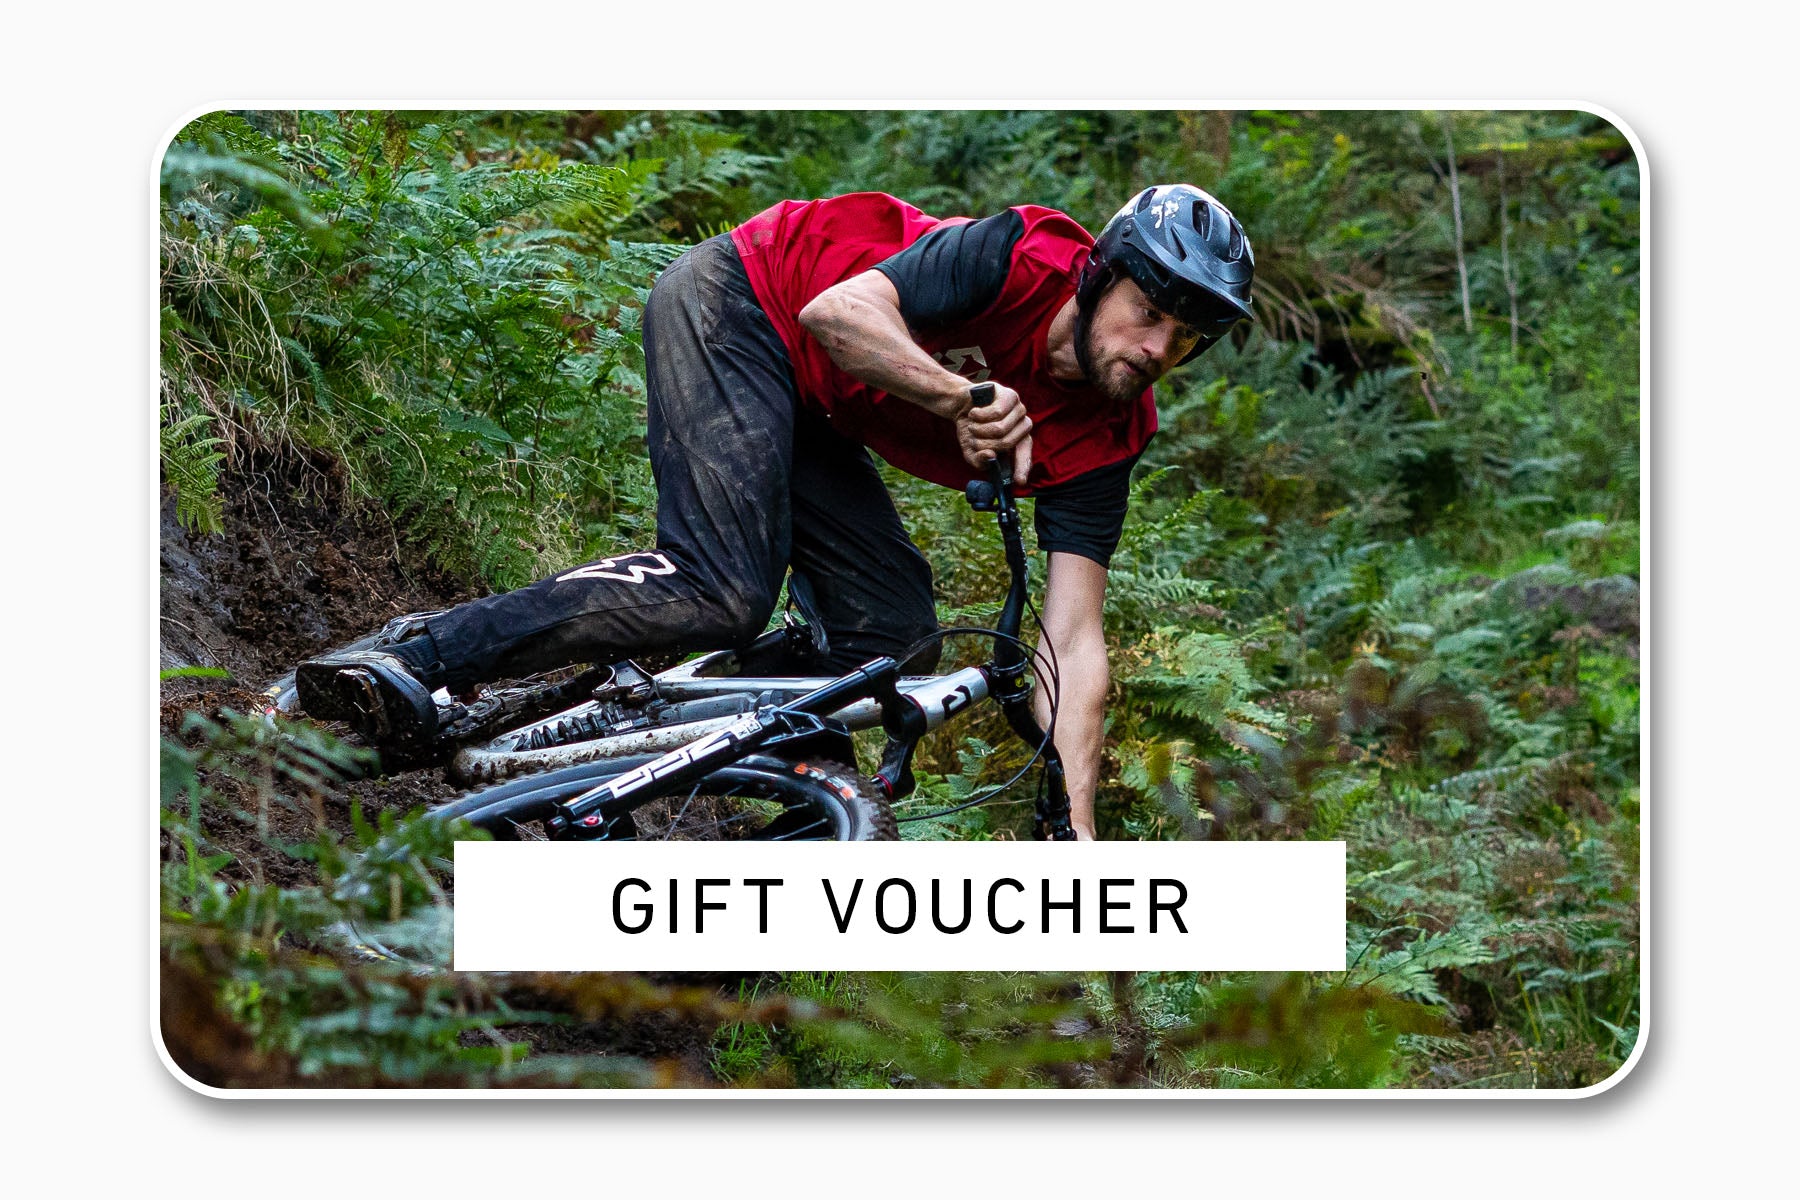 Gift Vouchers & Cards